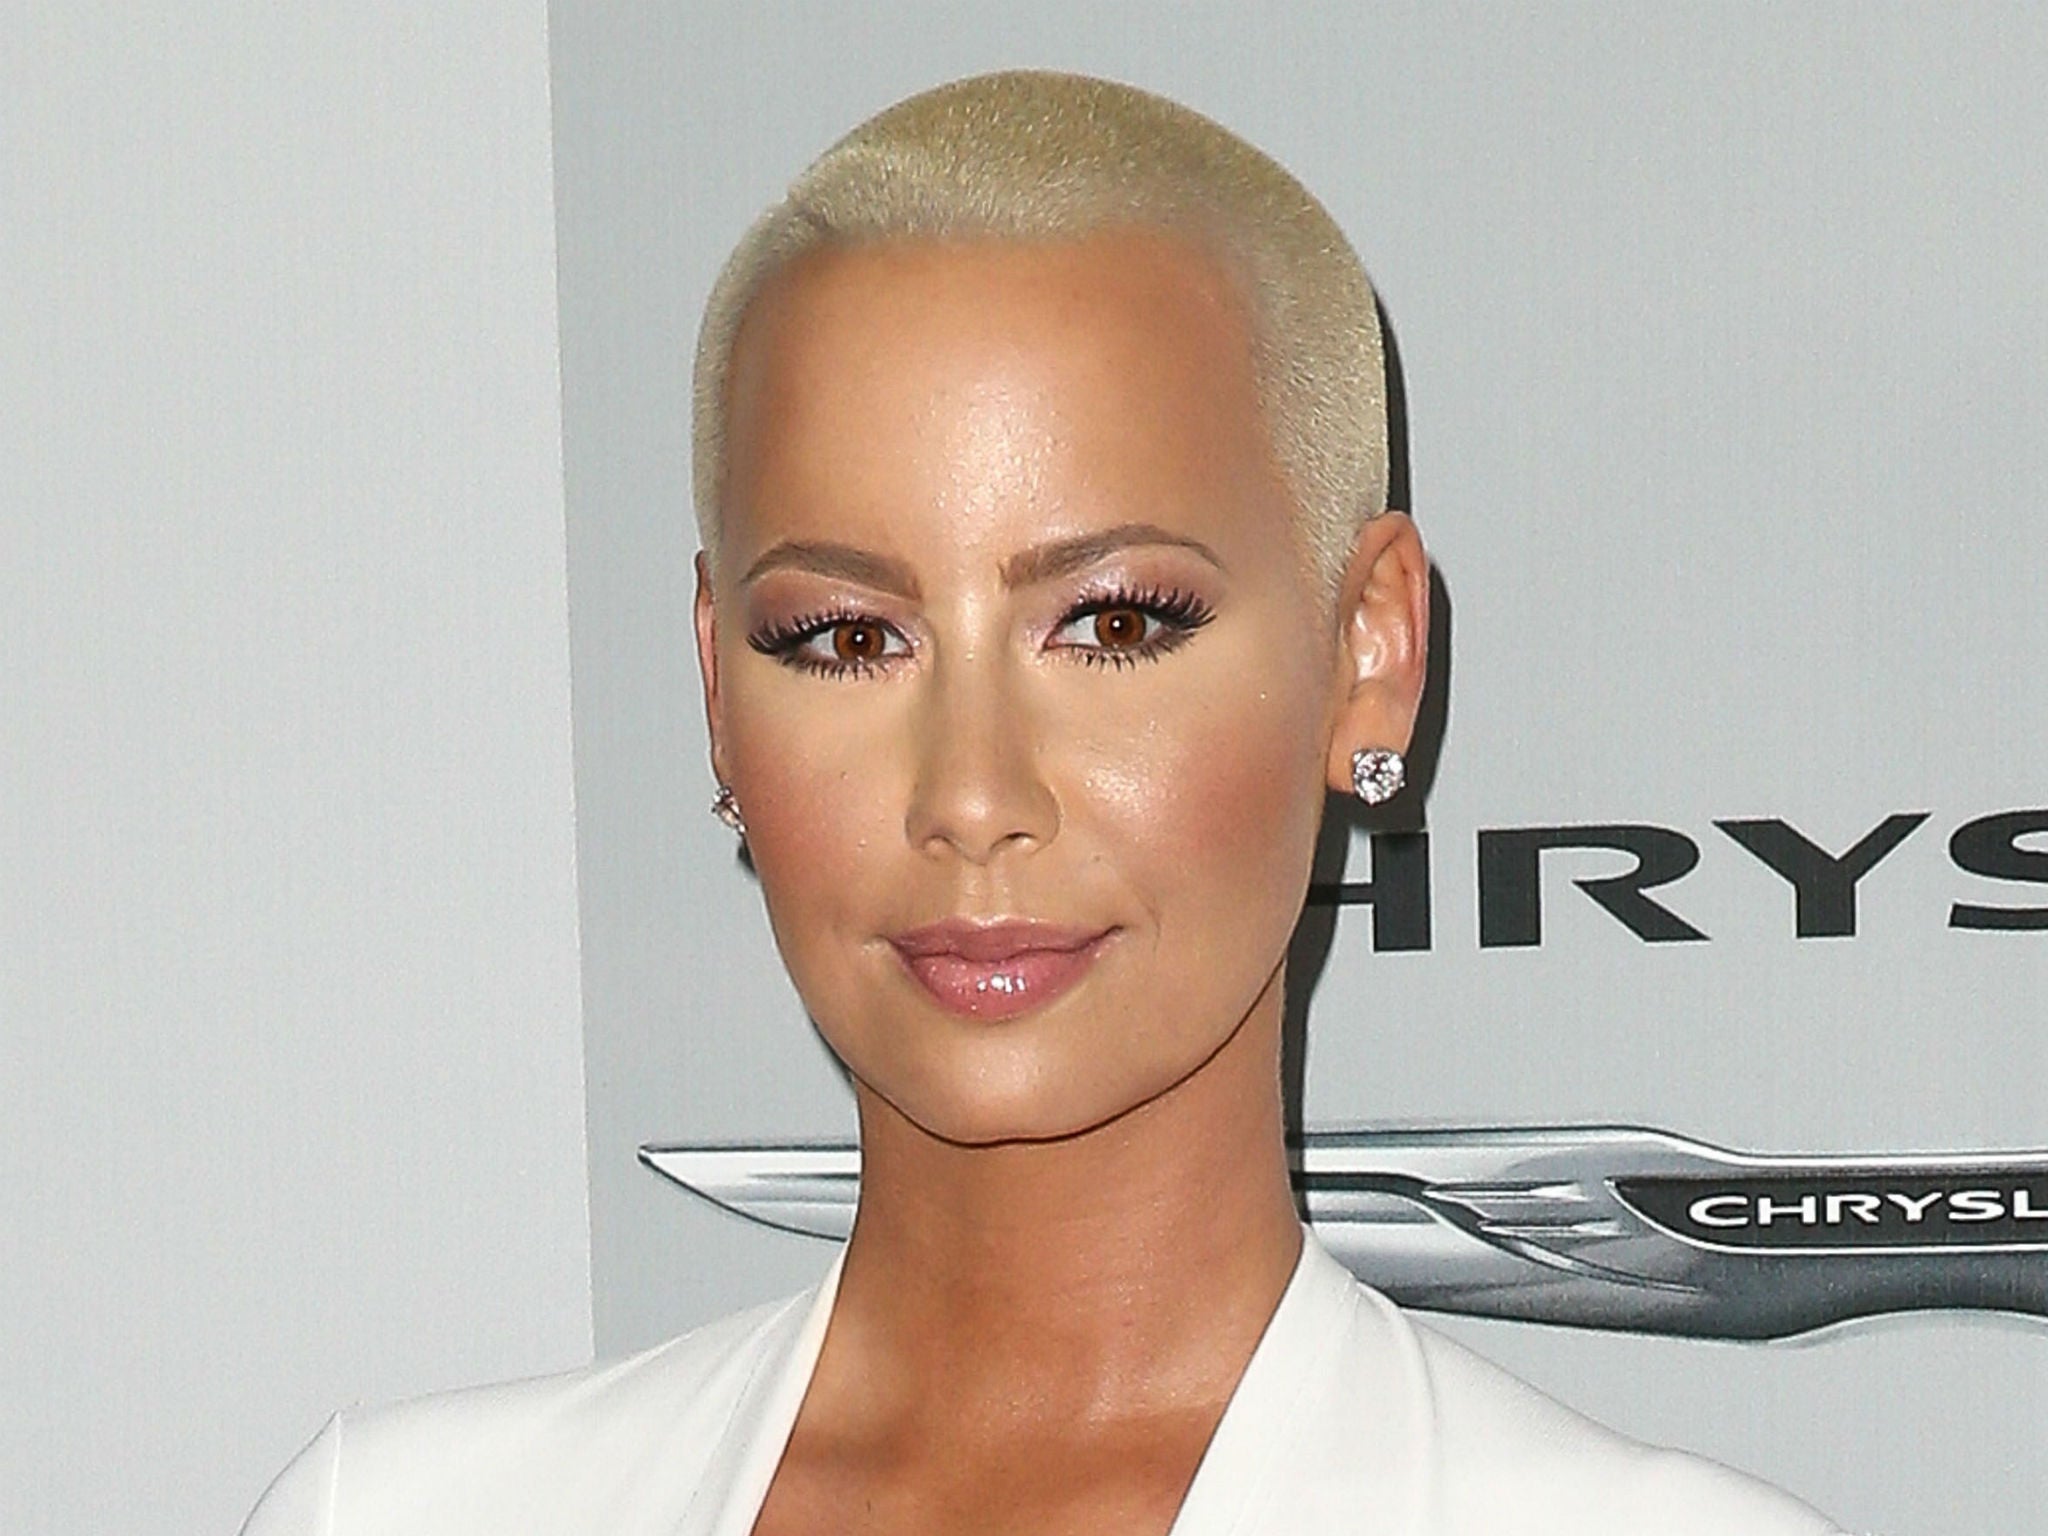 Amber Rose Who Is The Model And Feminist Campaigner The Independent The Independent